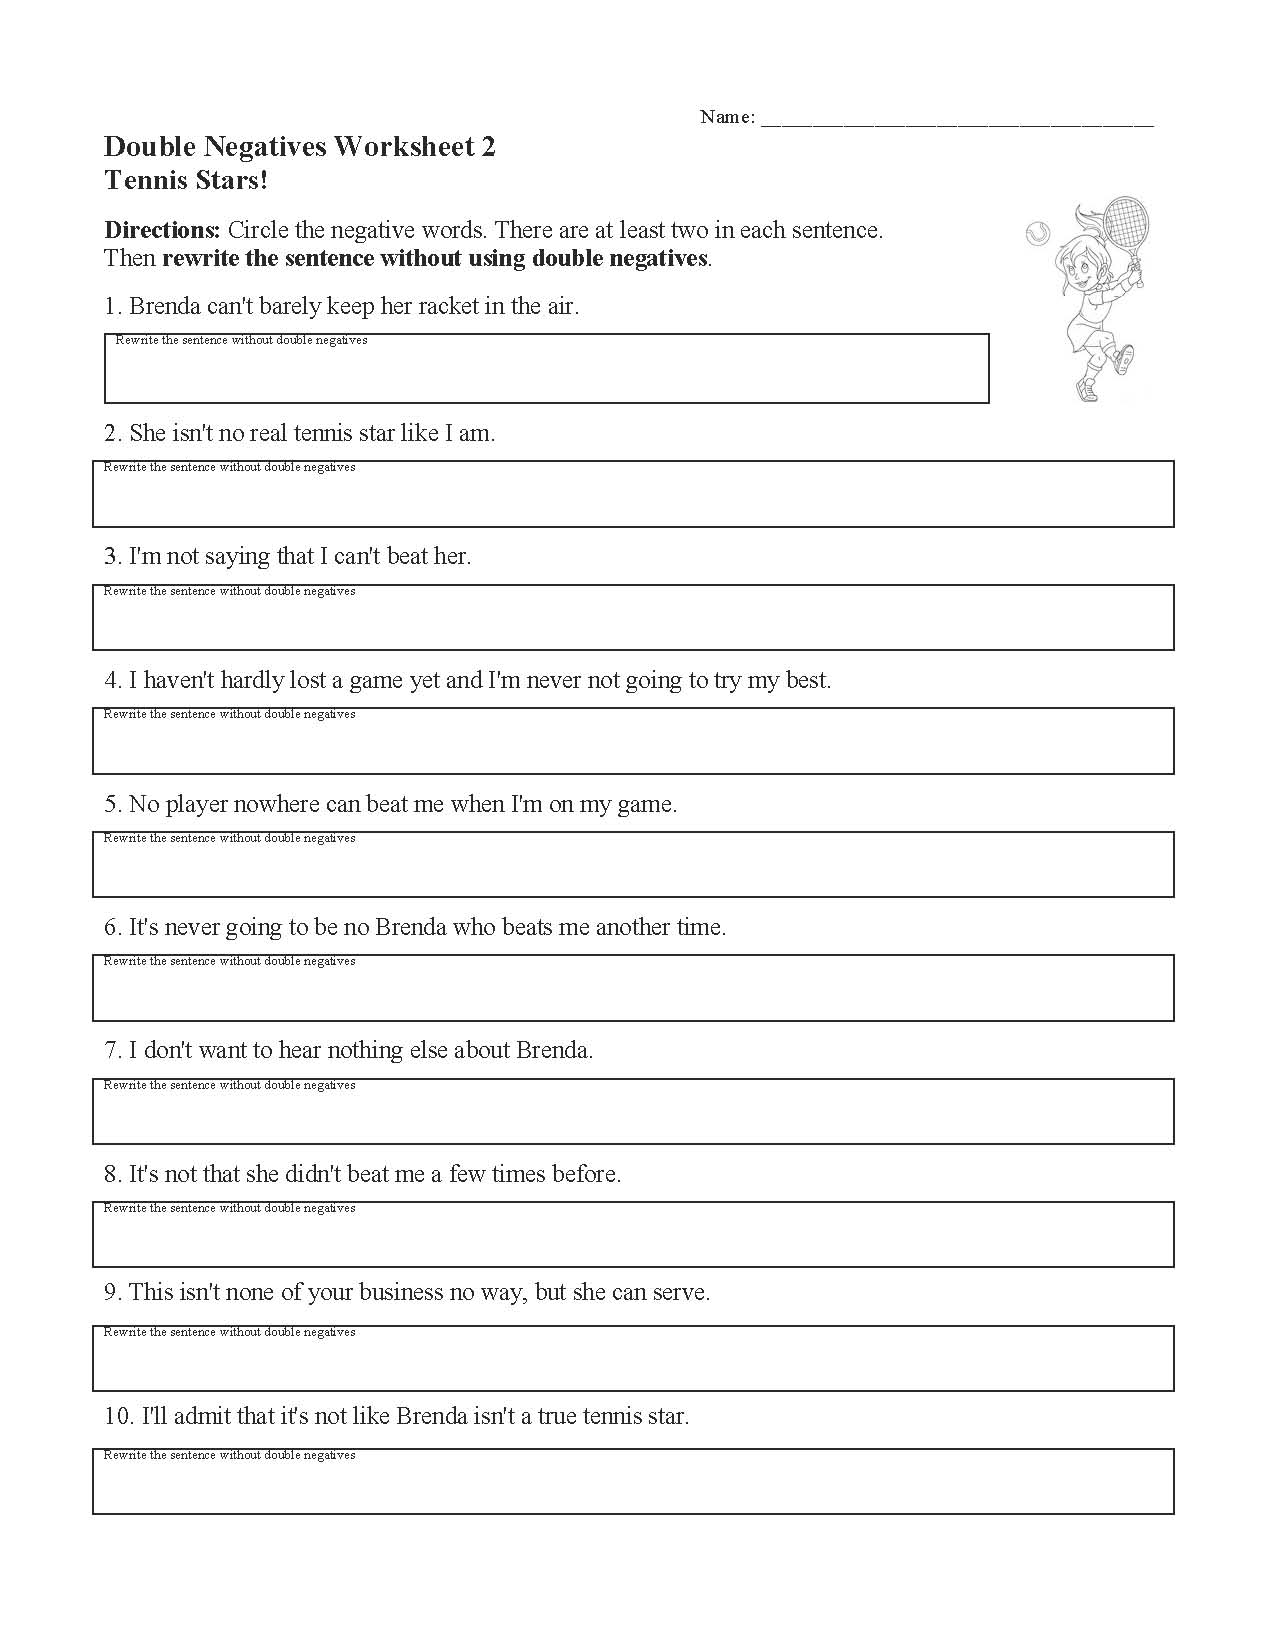 double-negatives-worksheet-2-preview